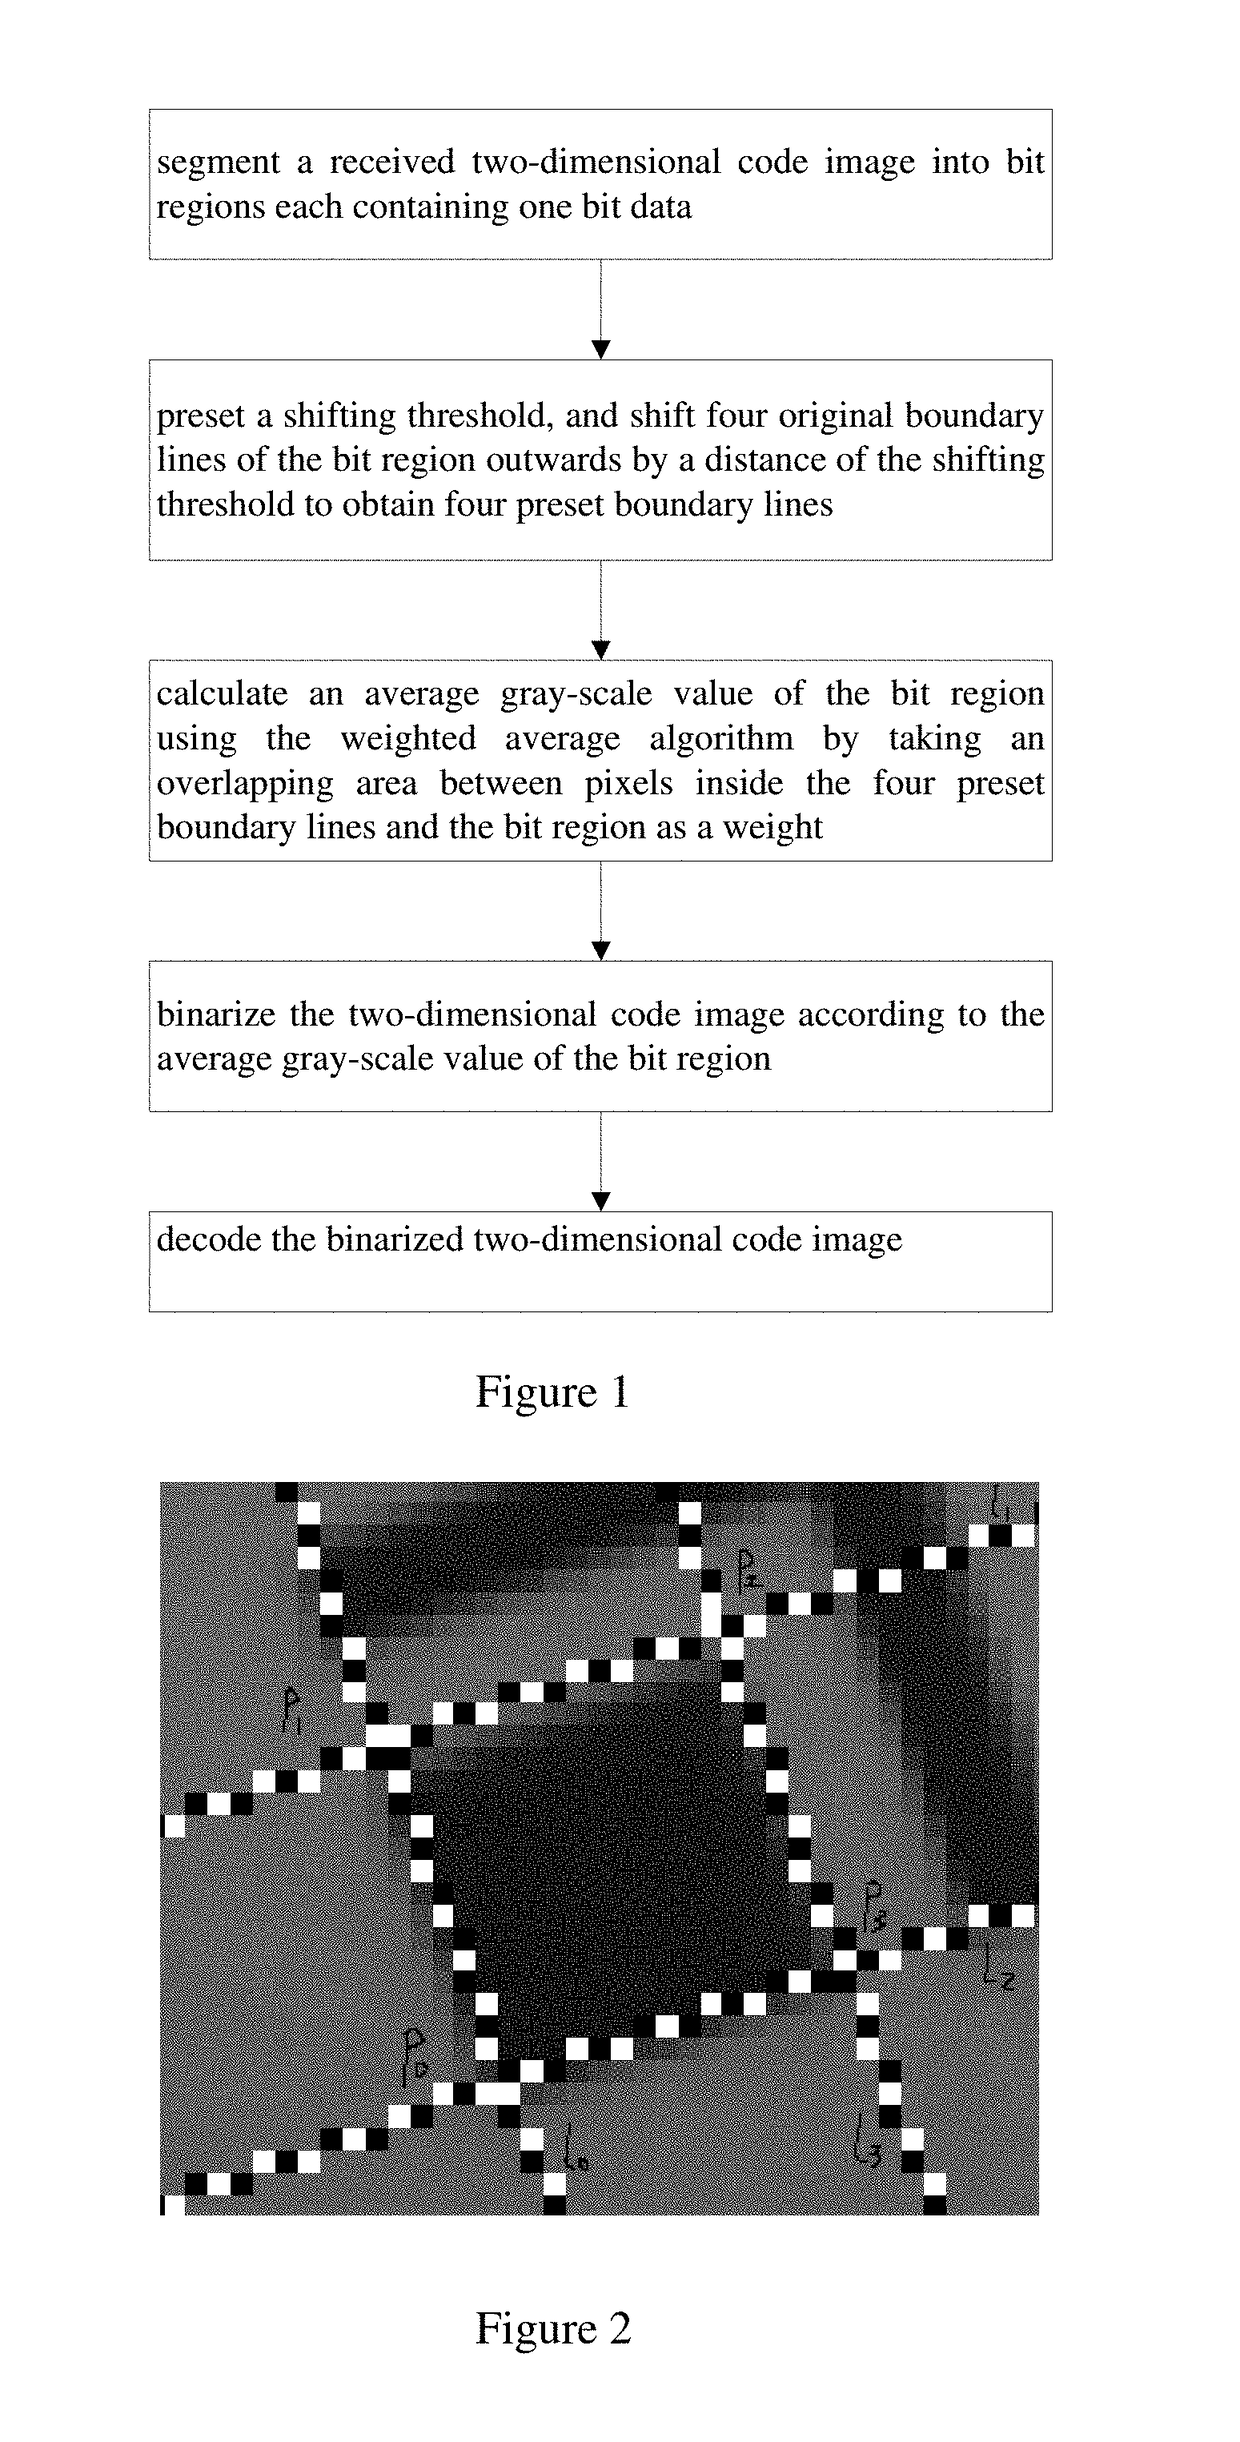 Method and system for decoding two-dimensional code using weighted average gray-scale algorithm